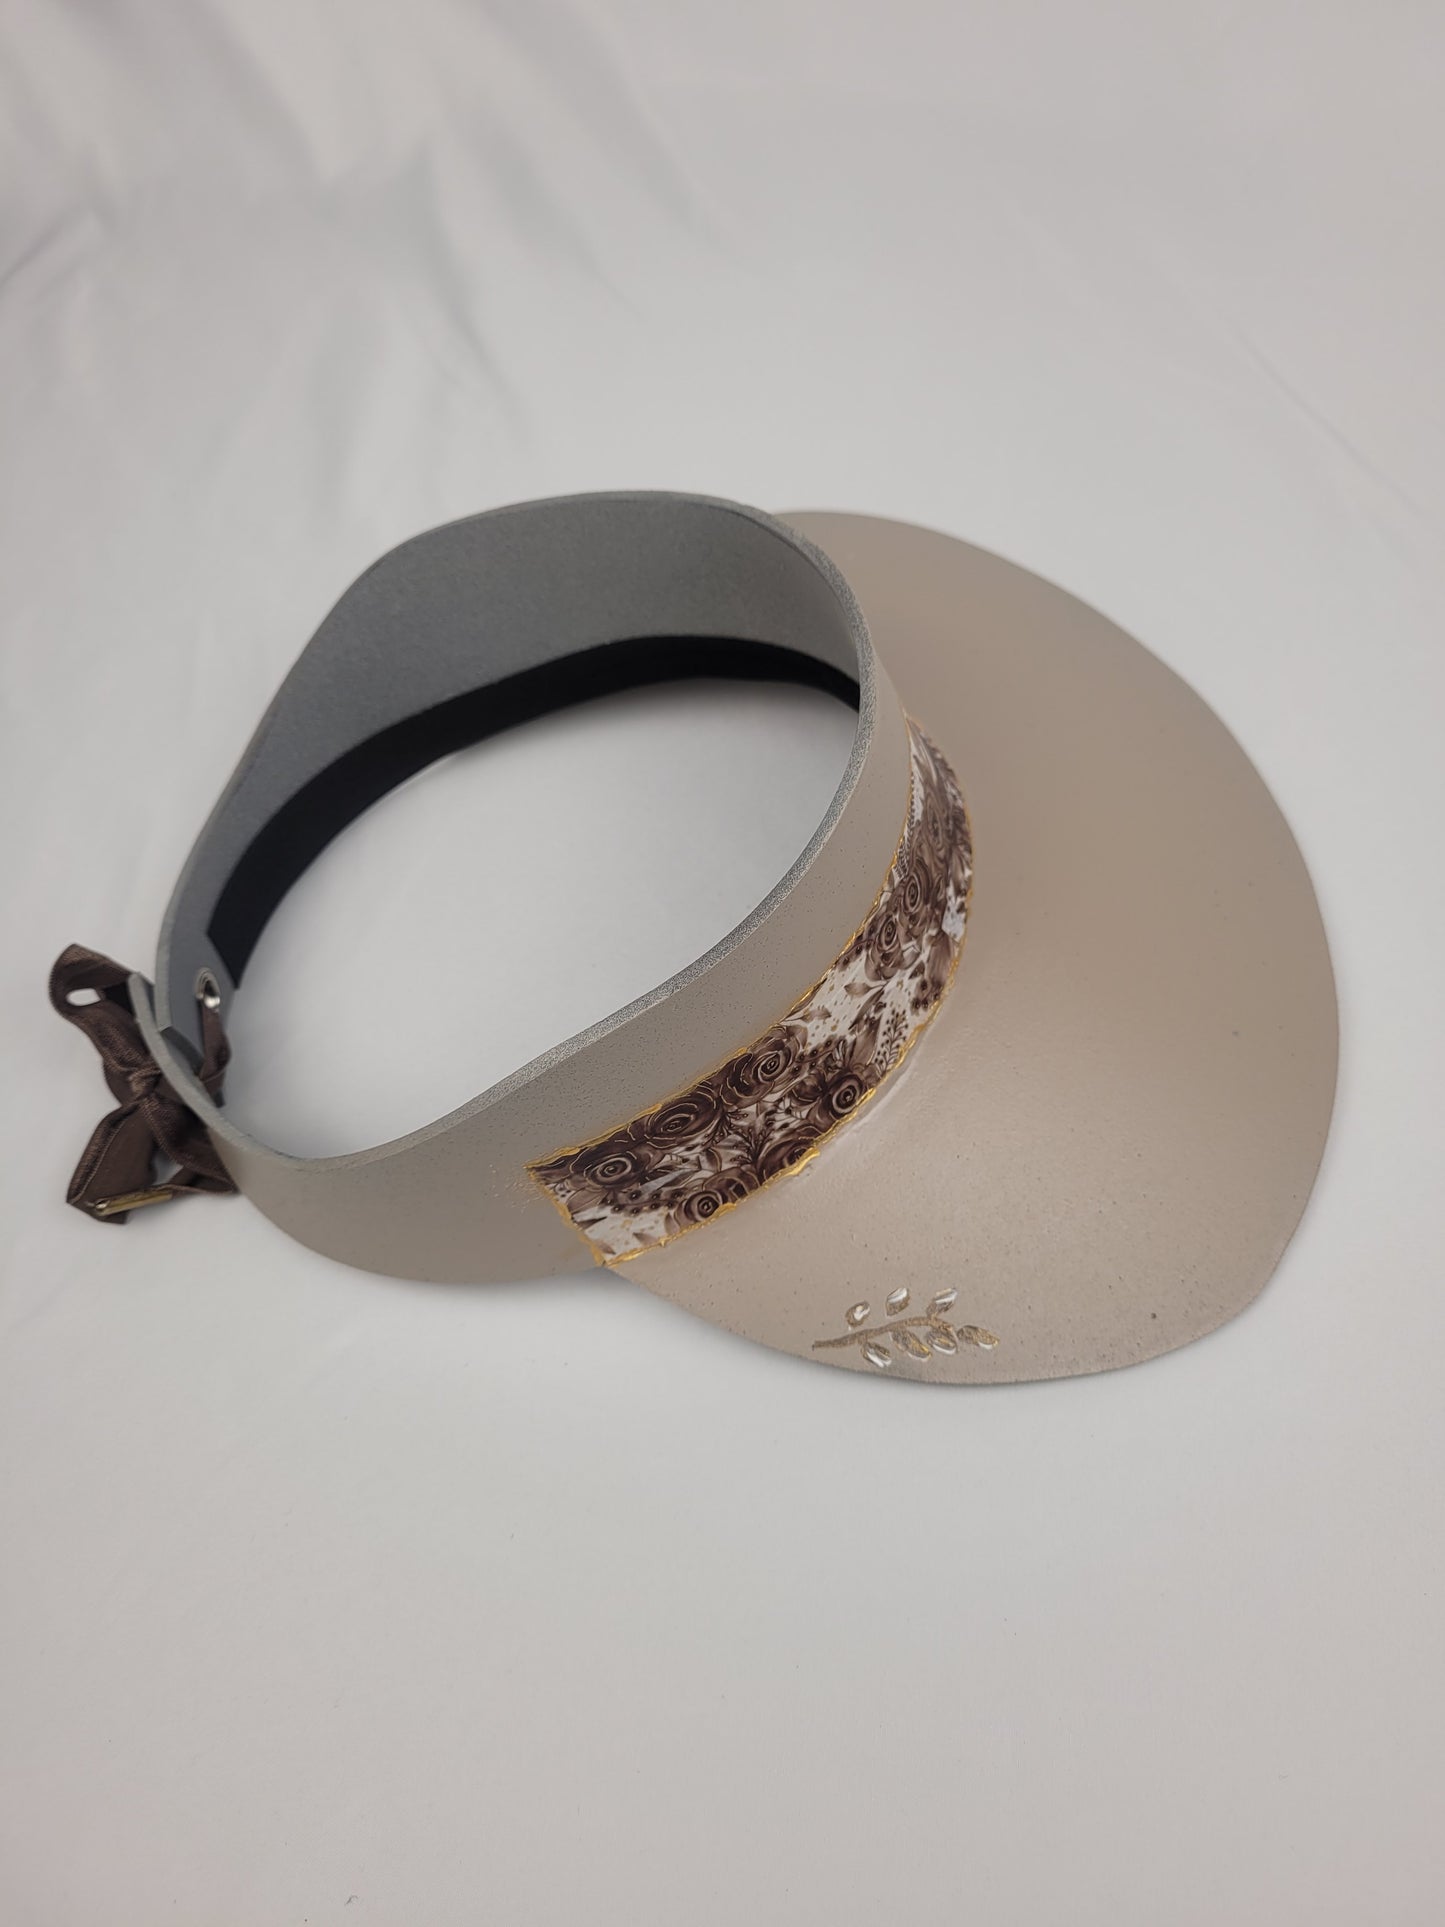 Tall Elegant Taupe Audrey Visor Hat with Neutrals Floral Band and  Handpainted Floral Motifs: Golf, Pool, Hiking